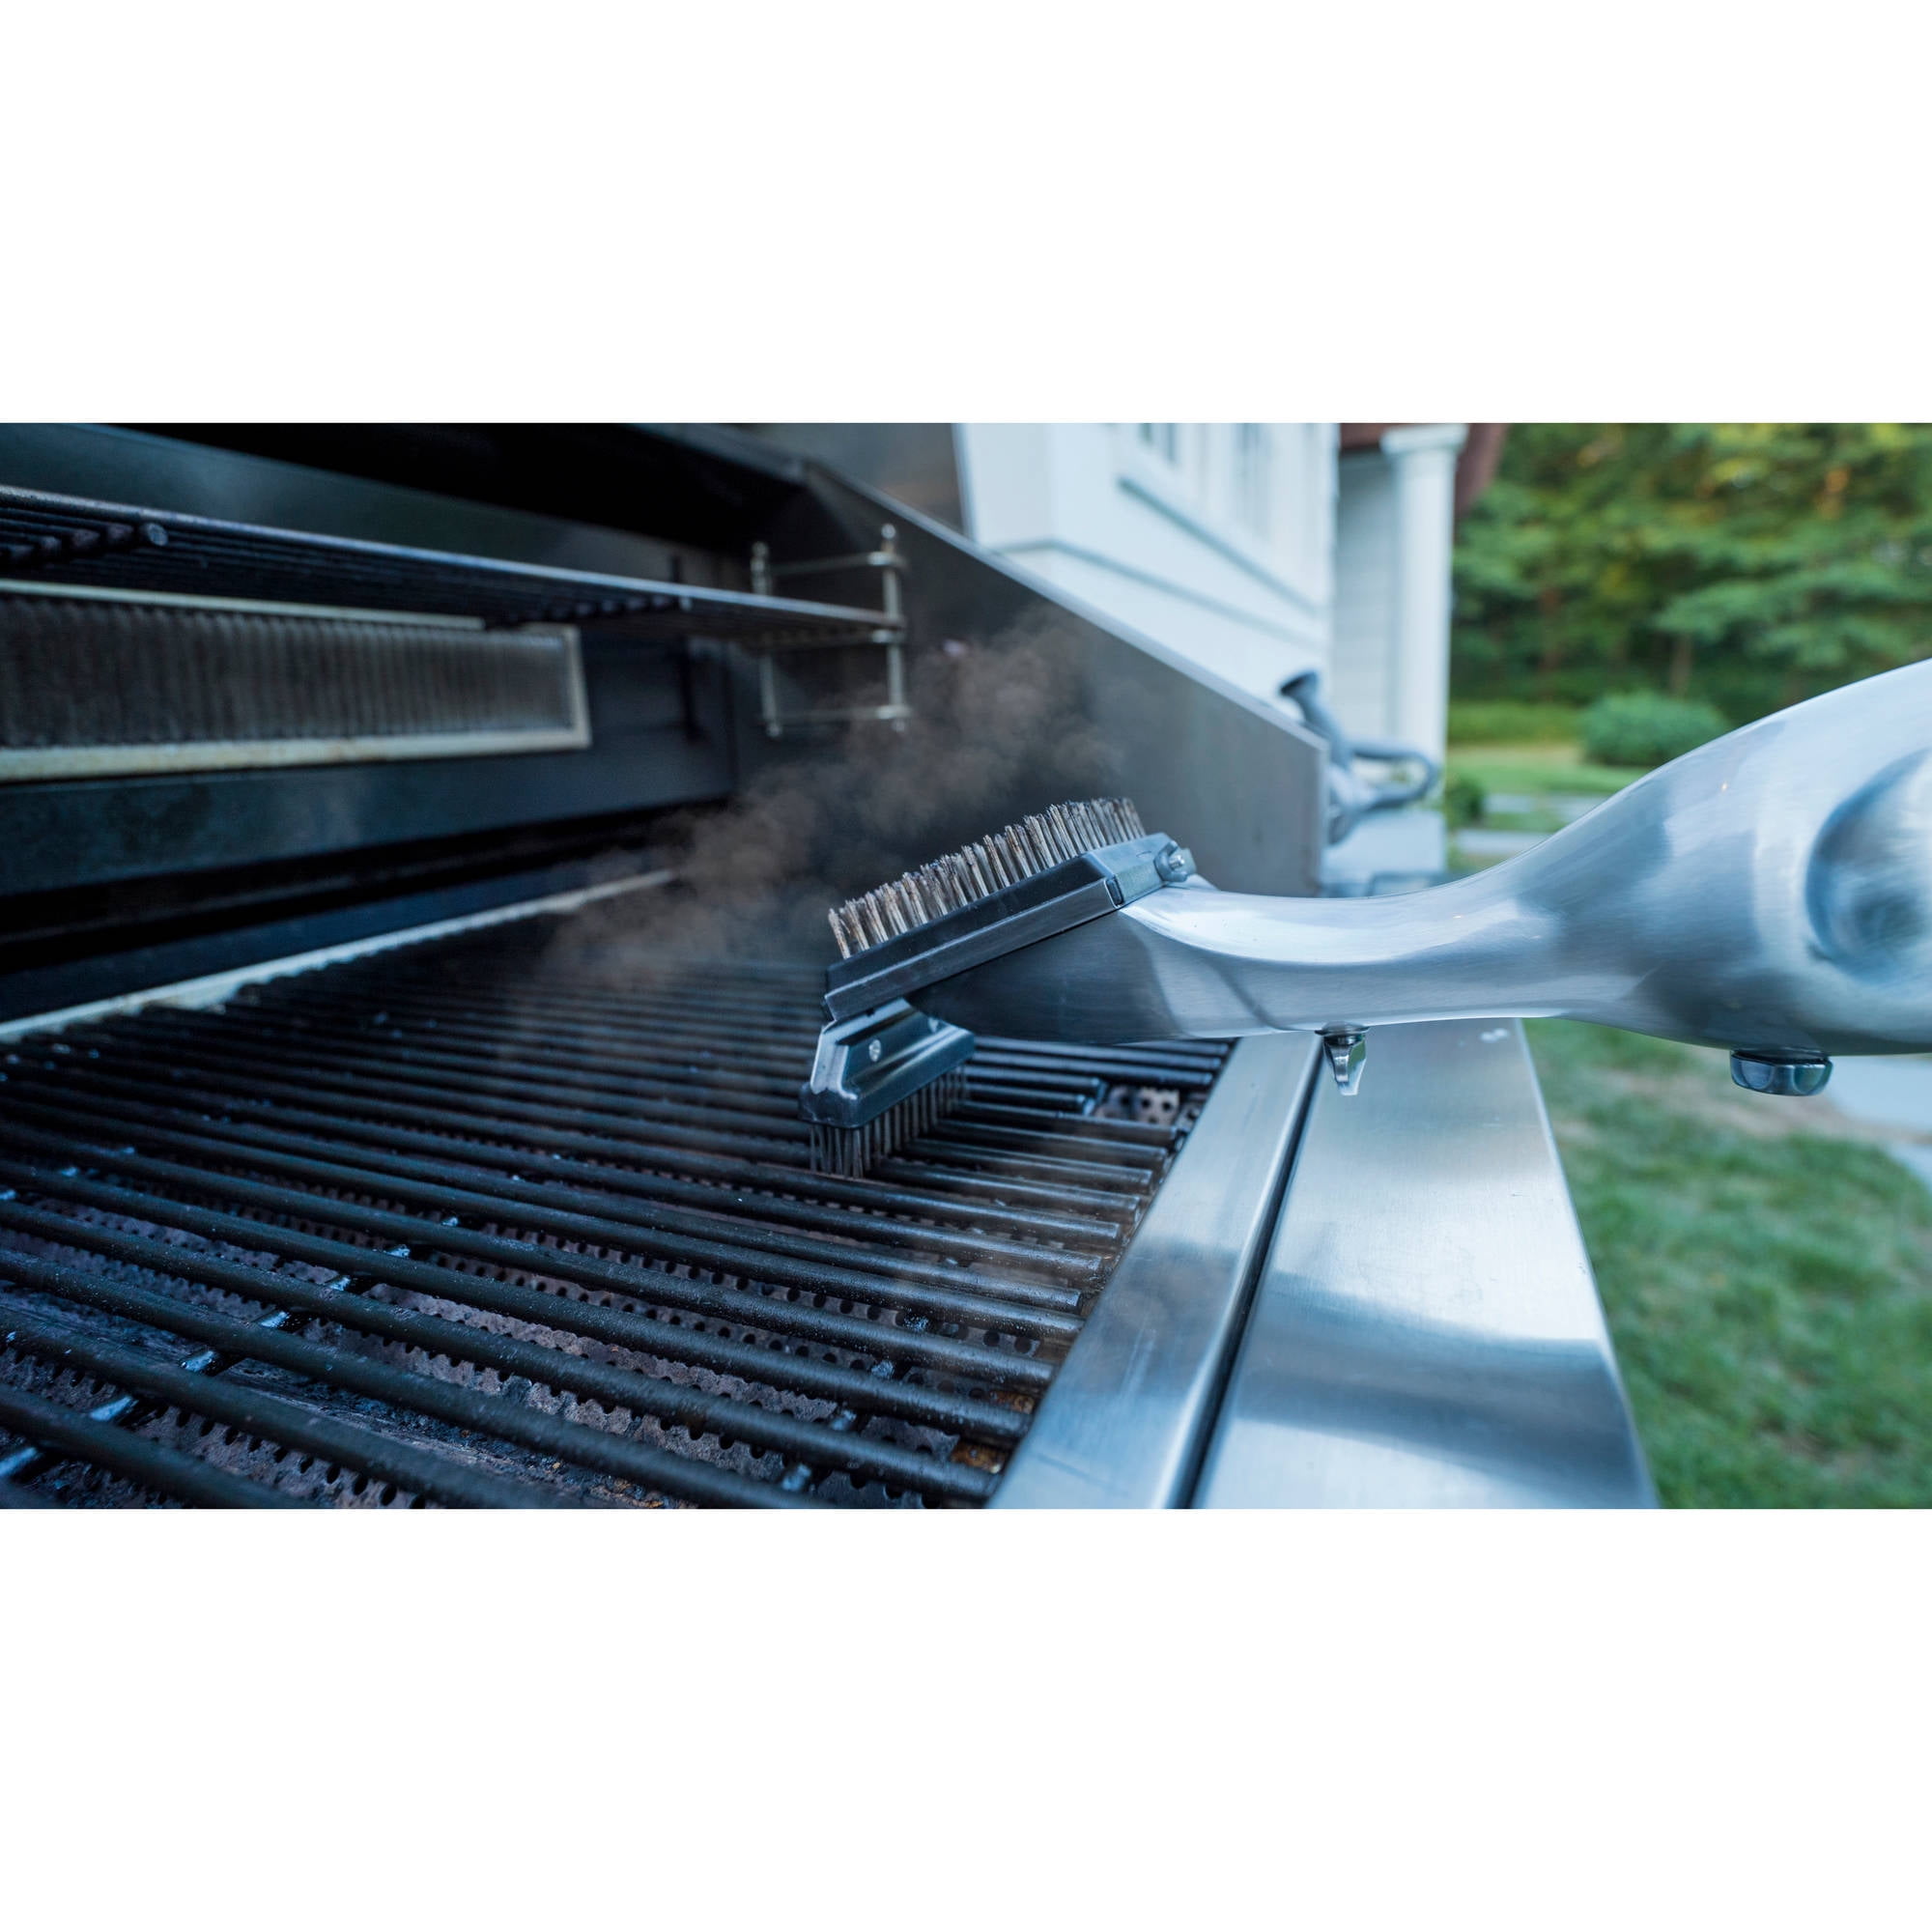 Grill Daddy 1GDP1RB Pro with Replacement Brush - Grey - Bed Bath & Beyond -  14684613